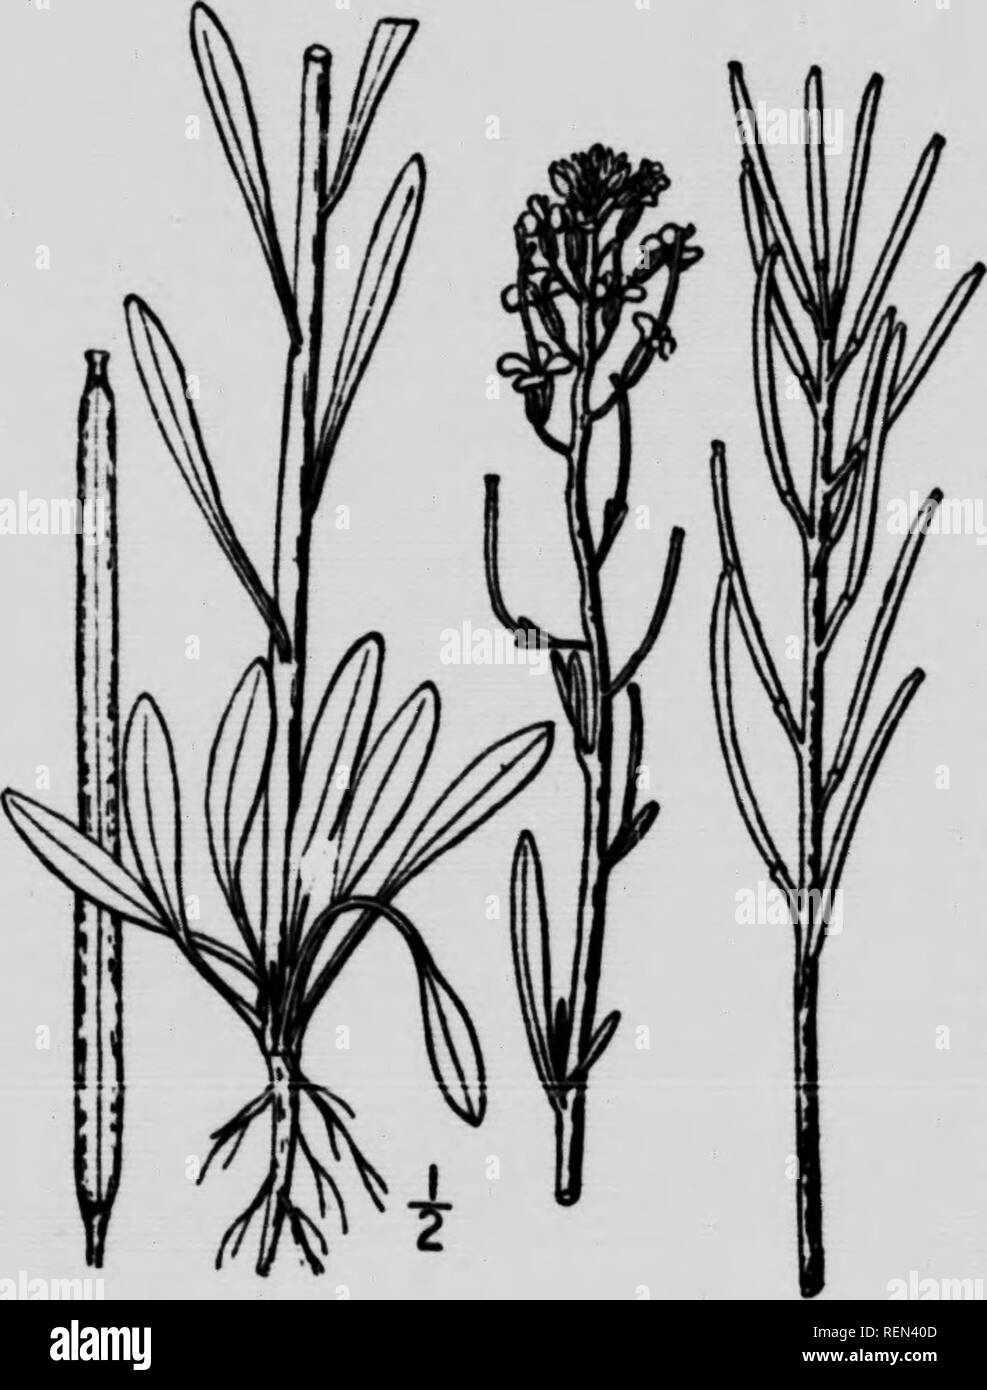 . Farm weeds and how to control them [microform]. Weeds; Botanique; Mauvaises herbes; Botany. SMALL WALLFLOWER-£&gt;«j^«„ parviflorum.. A native biennial of the mus- tard family which sometimes appears ahead of the grain in crop sown on stubble or a care- lessly worked sunimerfallow, Itg flowers are yellow and about a quarter of an inch across. The slender seed pods are about two inches in length, containing small irregularlynshaped brown- ish seeds. The whole plant is of a sage green colour. This plant is often mist ken for wormseed mustard. There is somewhat of a resemblance, but the plant i Stock Photo